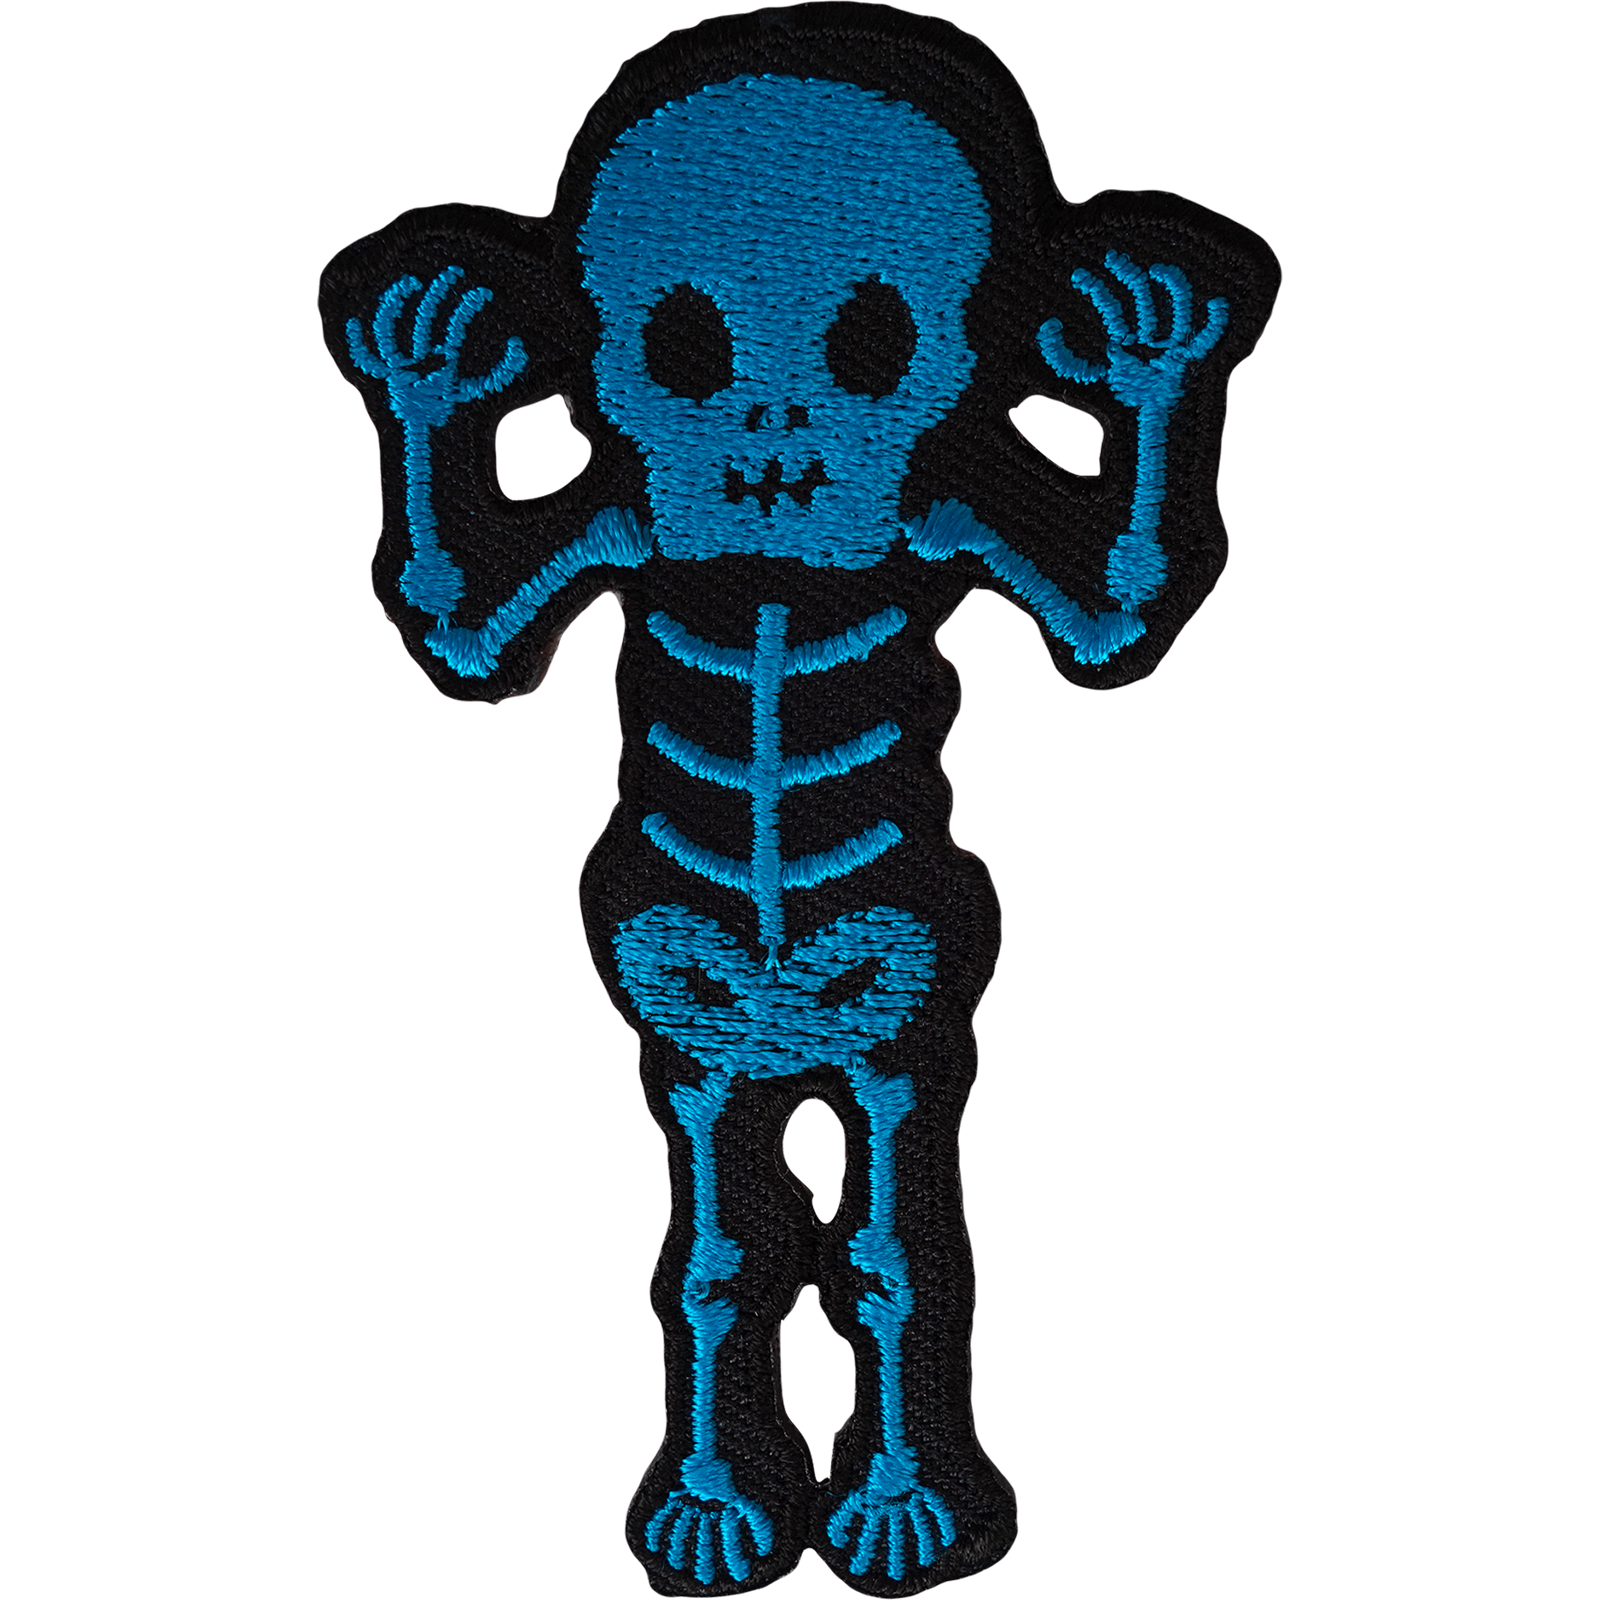 Skeleton Iron On Patch Sew On Mens Womens Boys Girls Clothes Embroidered Badge